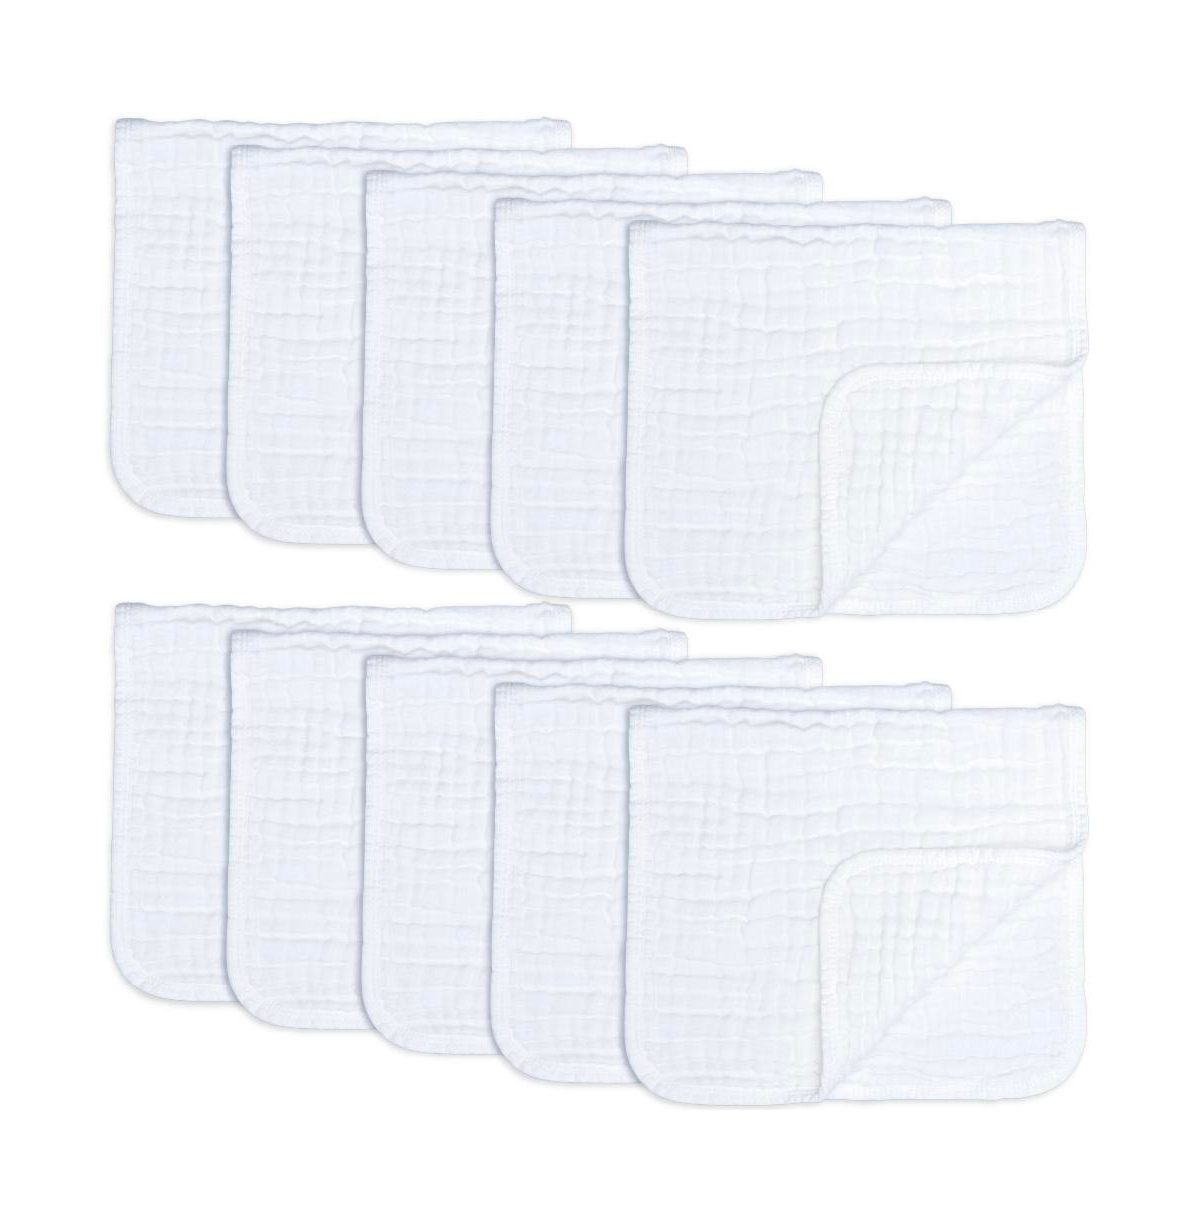 Comfy Cubs Baby Boys And Baby Girls Muslin Burp Cloths, Pack Of 10 In White